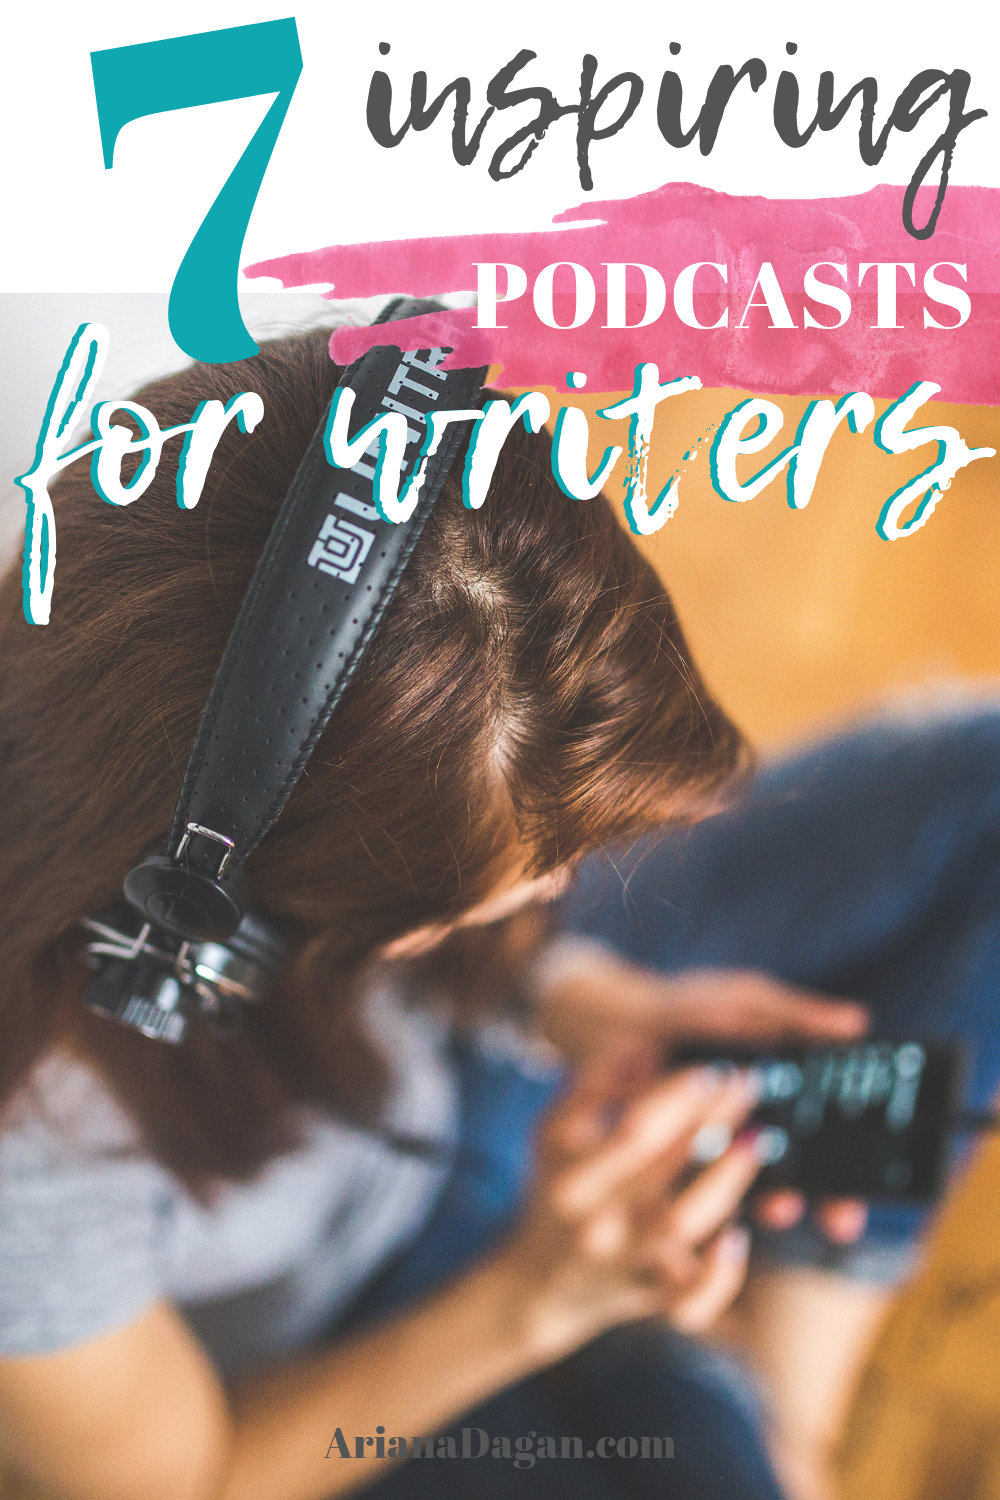 7 Inspiring Podcasts for writers by ariana dagan